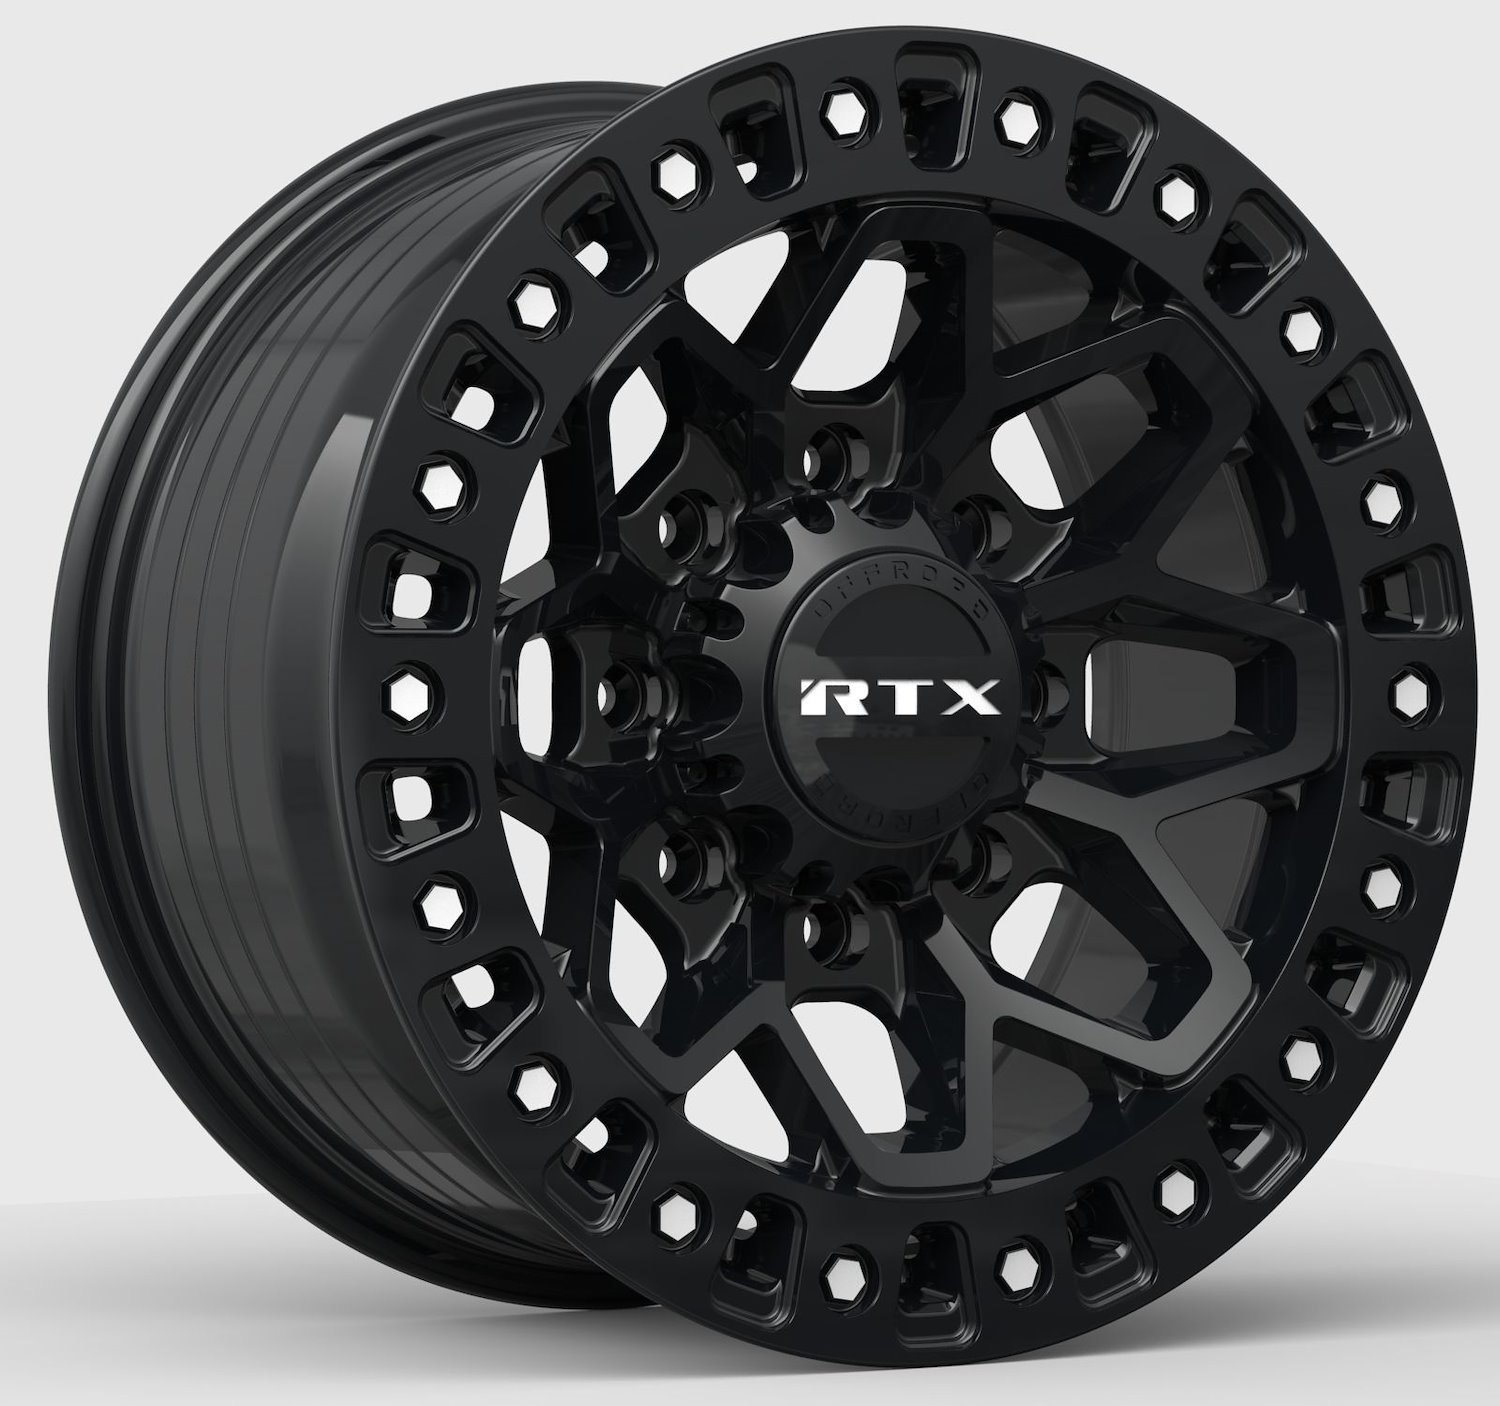 083194 Off-Road Series Zion Wheel [Size: 18" x 9"] Gloss Black Milled Rivets Finish